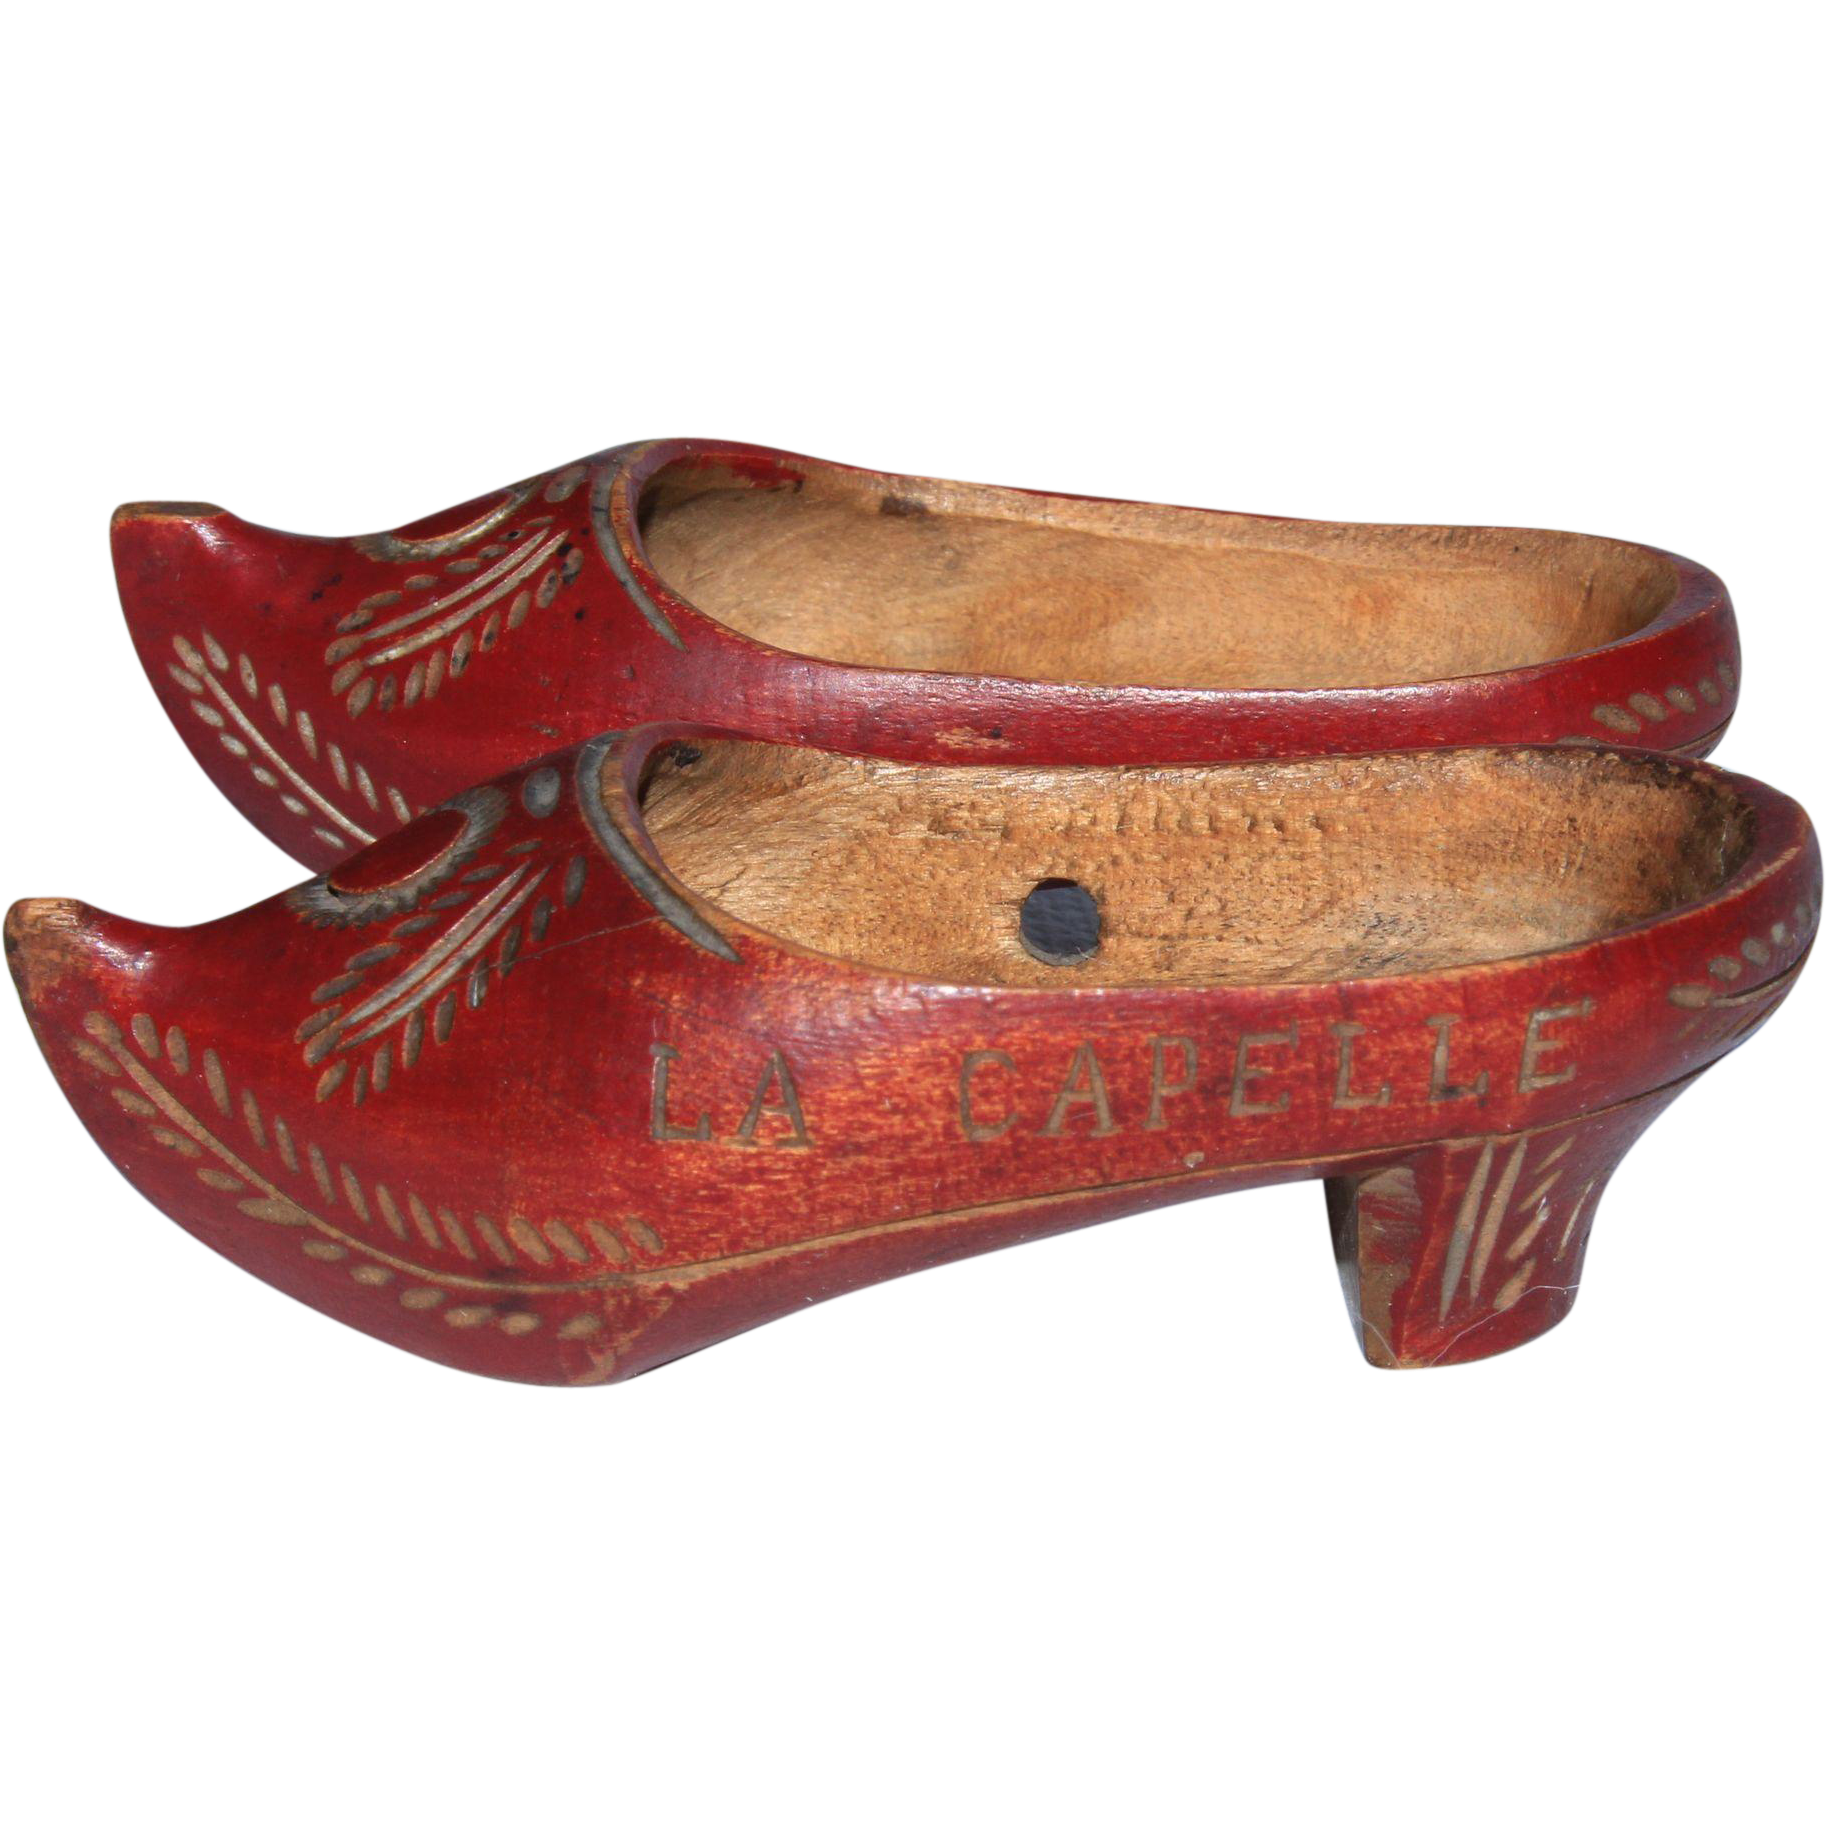 WW1 Commemorative - Small Wooden Shoes / Sabots / Clogs - 1914 ...